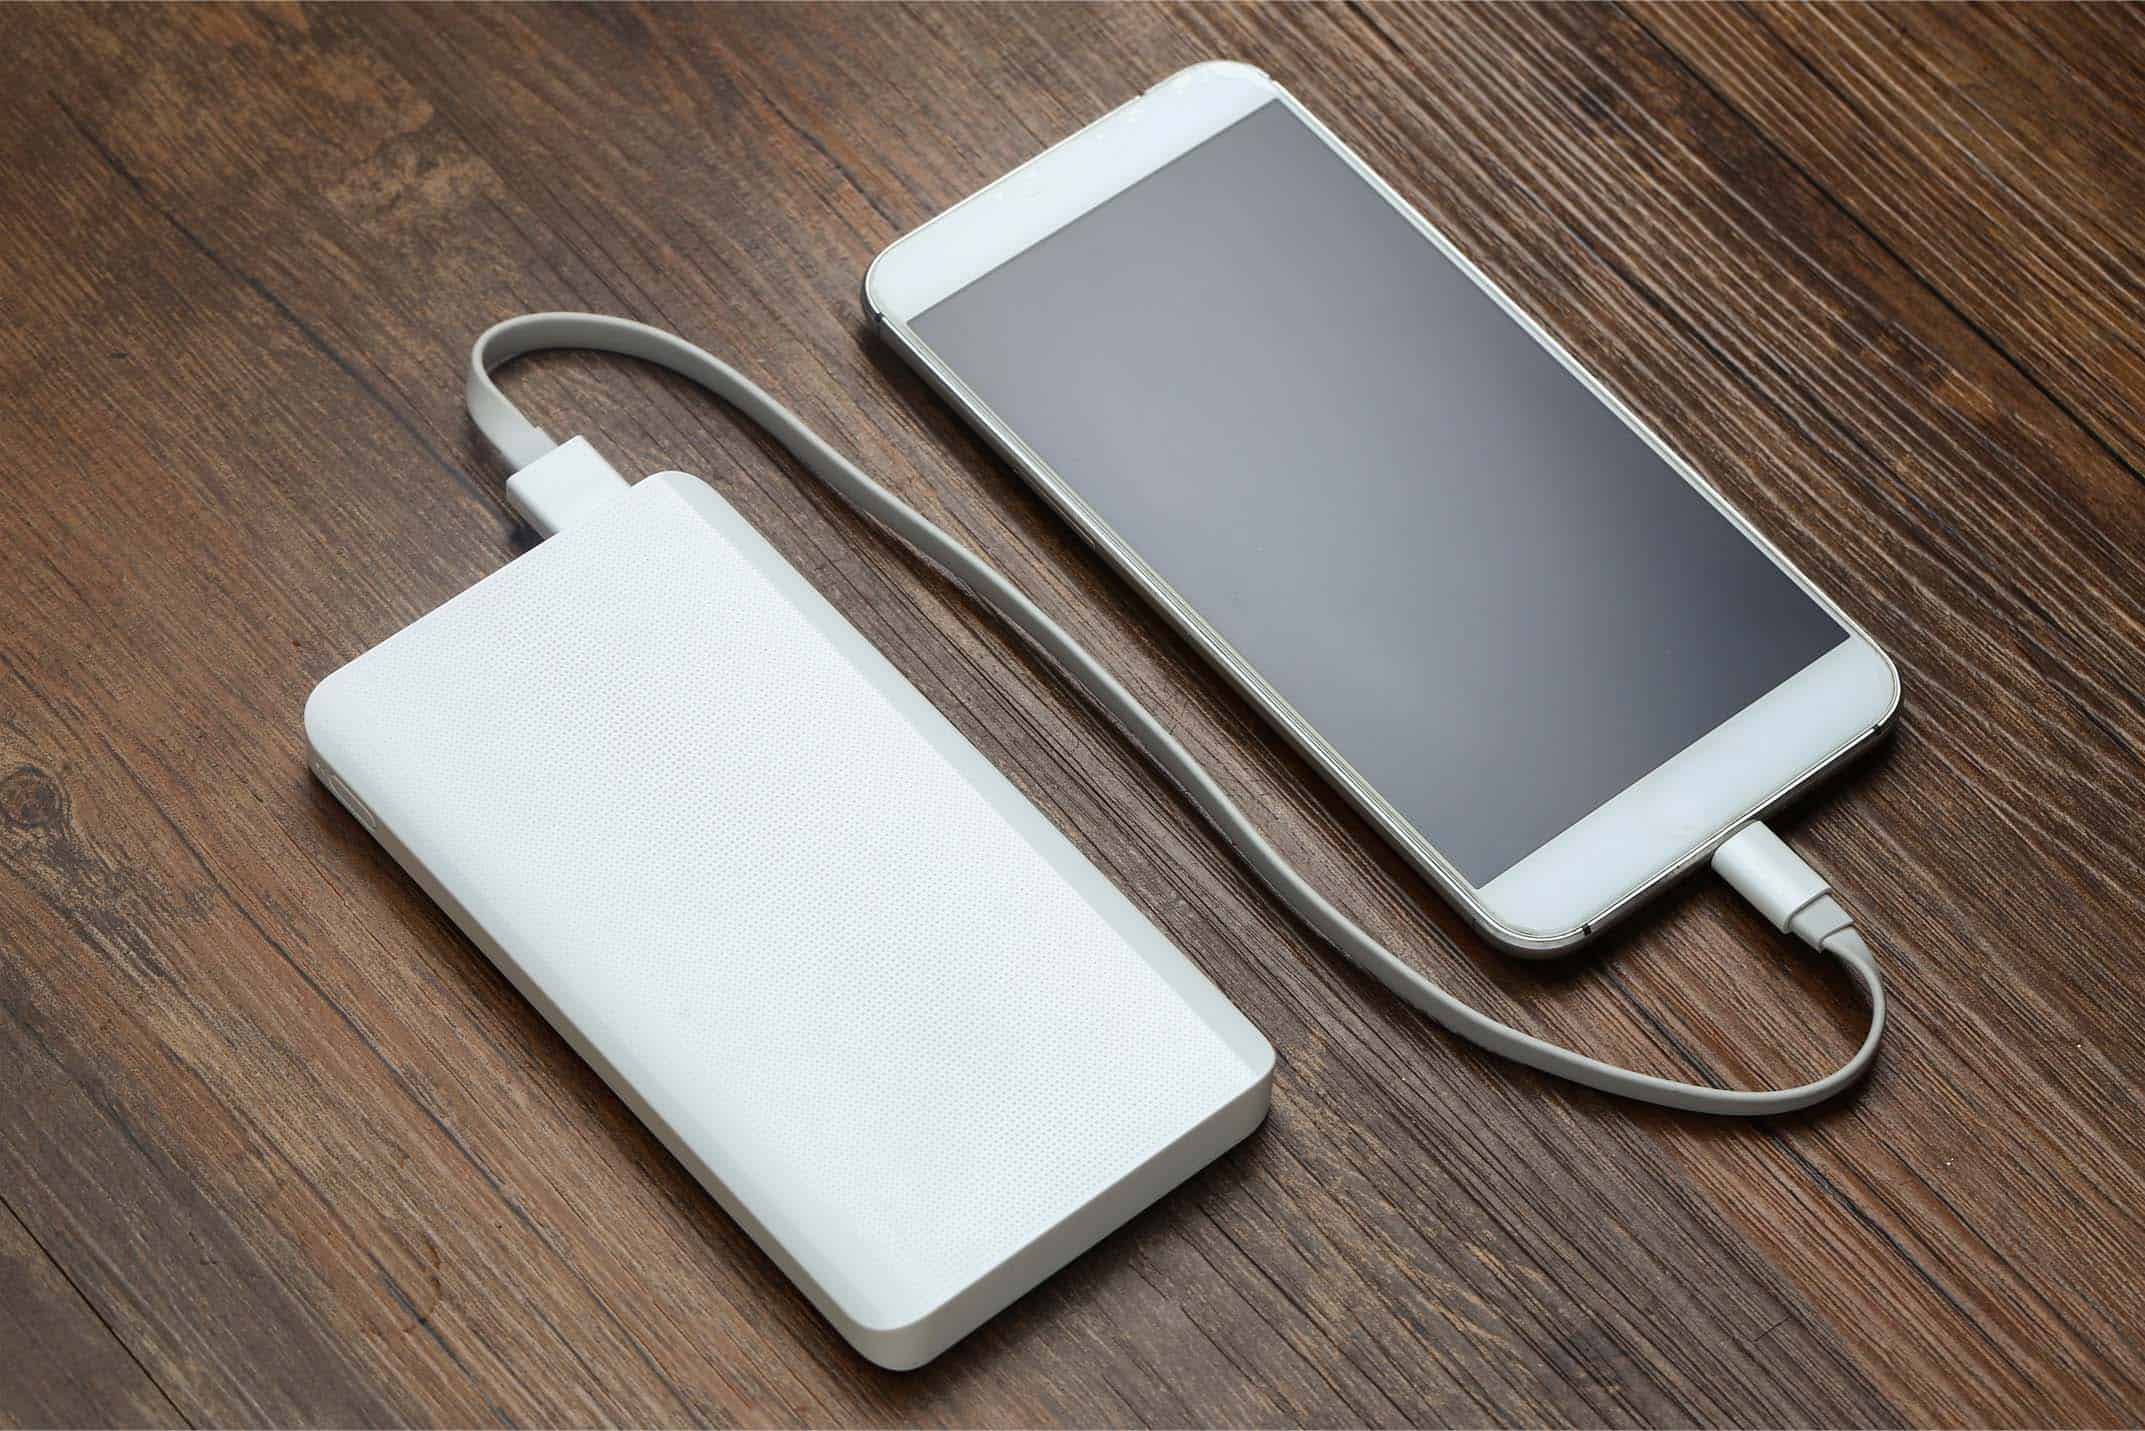 Why You Need a Power Bank